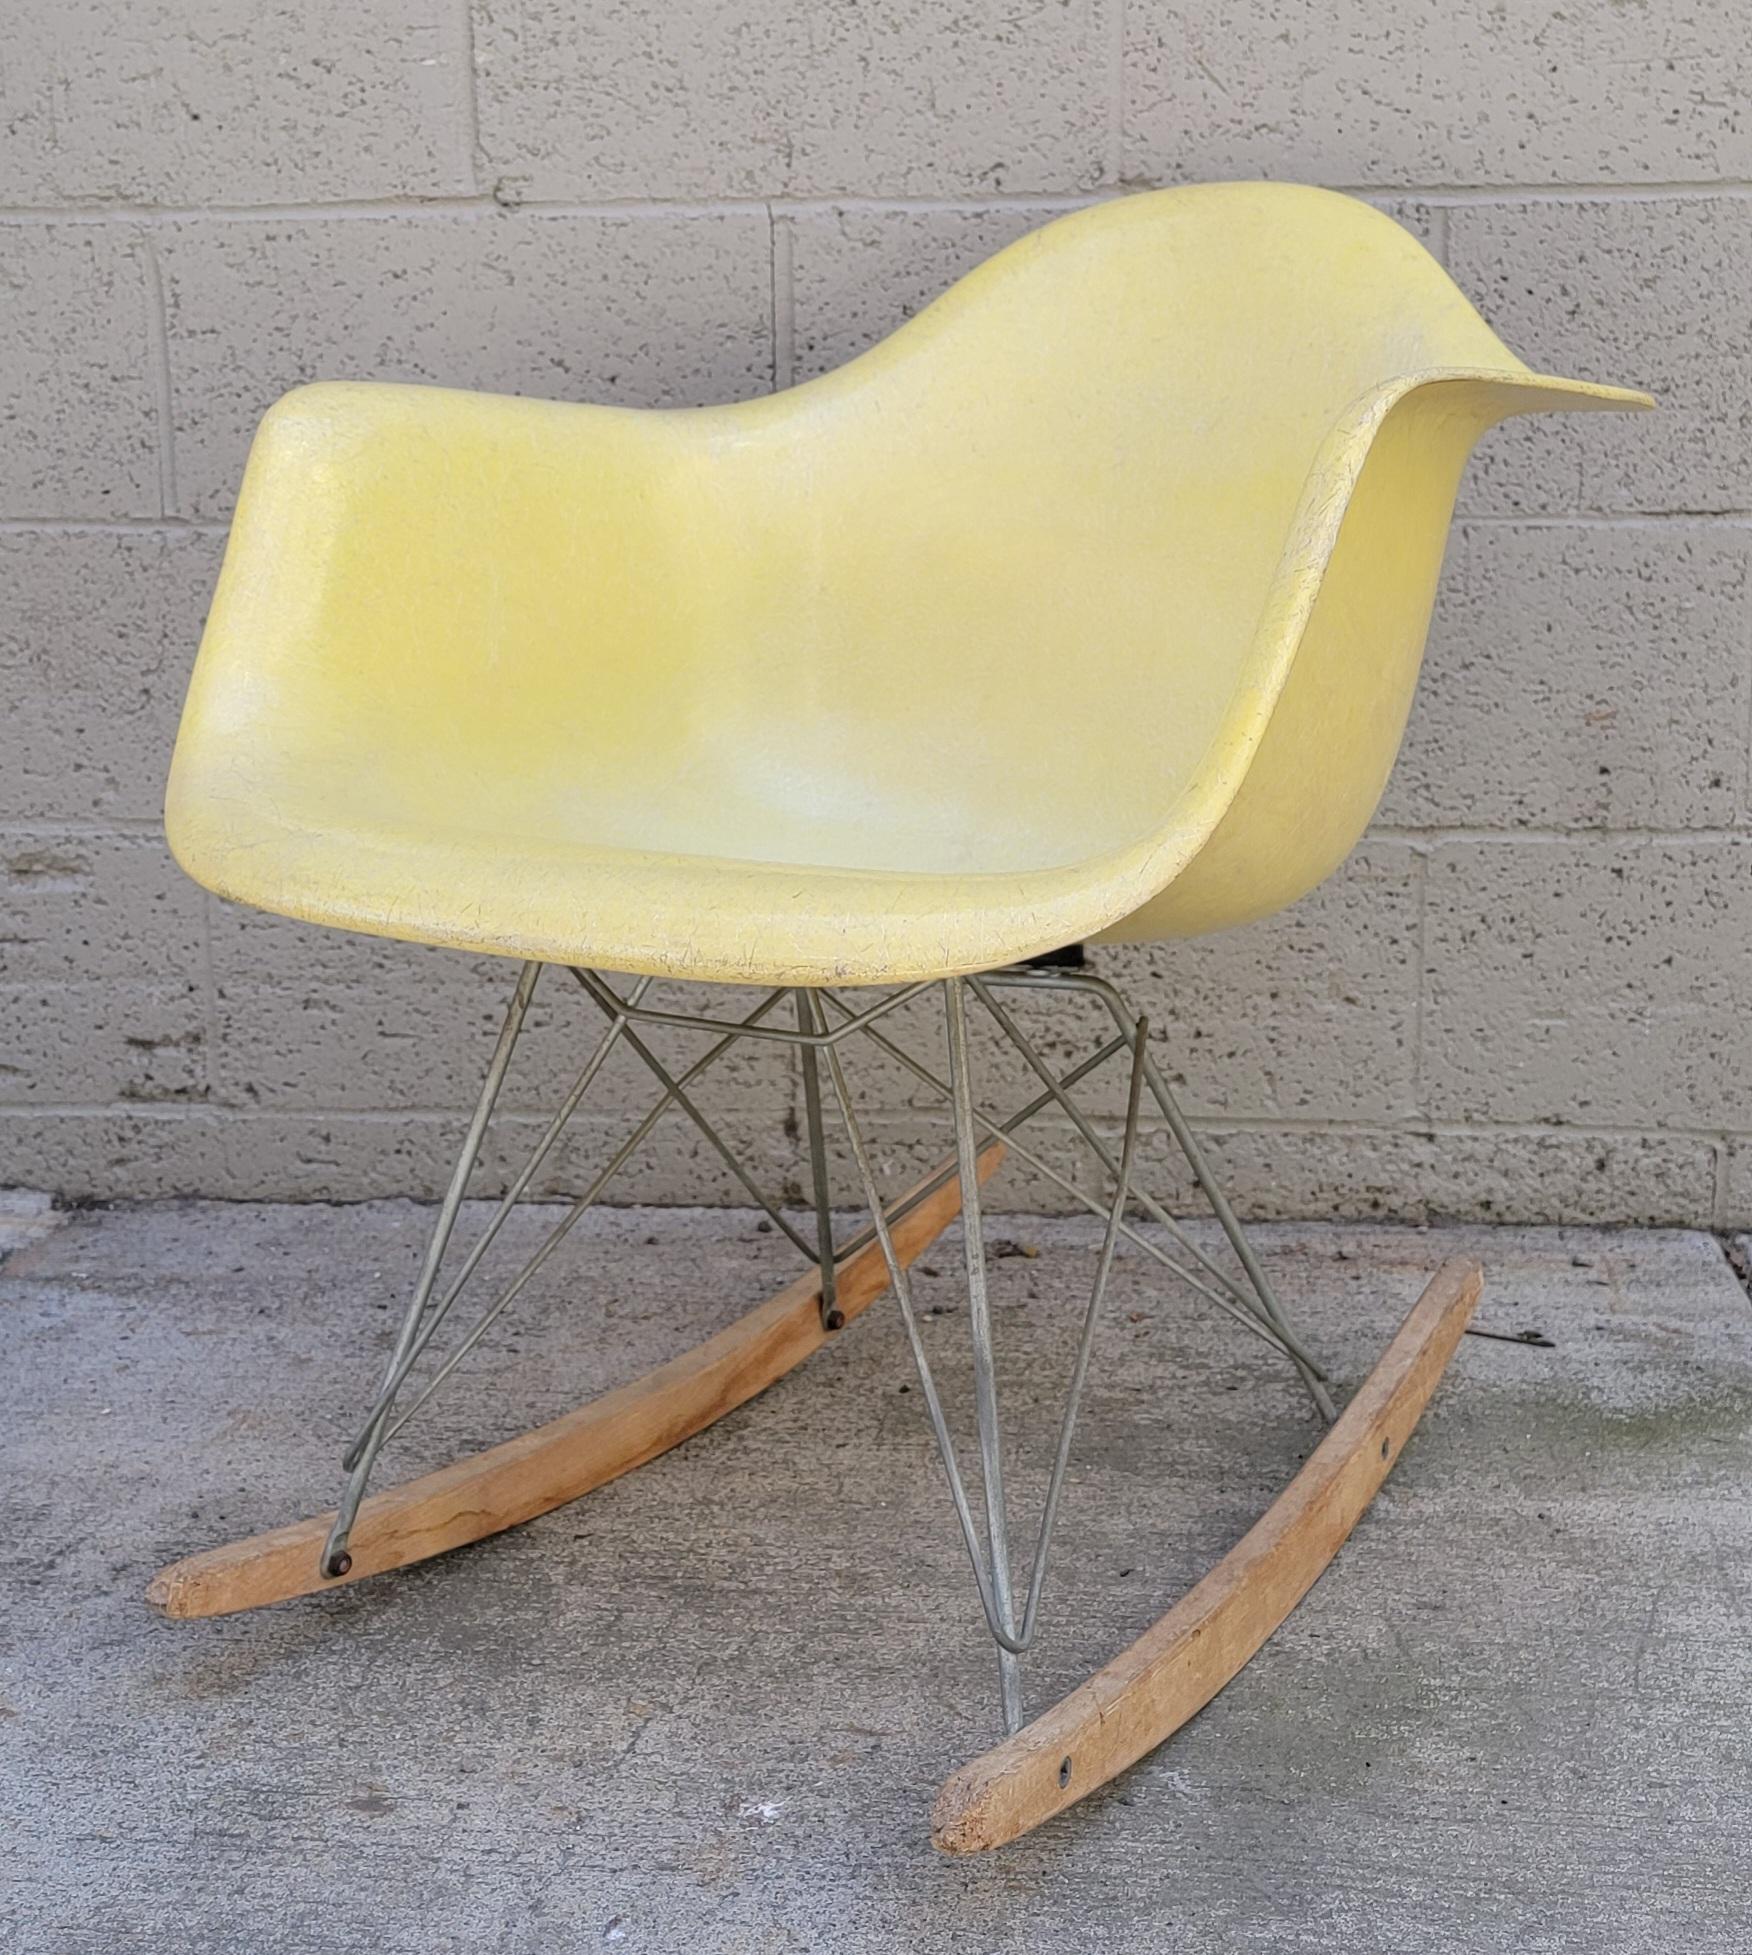 Authentic, early lemon yellow formed fiberglass RAR rocking chair designed by Charles and Ray Eames for Herman Miller. Dated 1957. Original base. Original vintage condition with imperfections from use and history. Appears a puppy? broke in his teeth